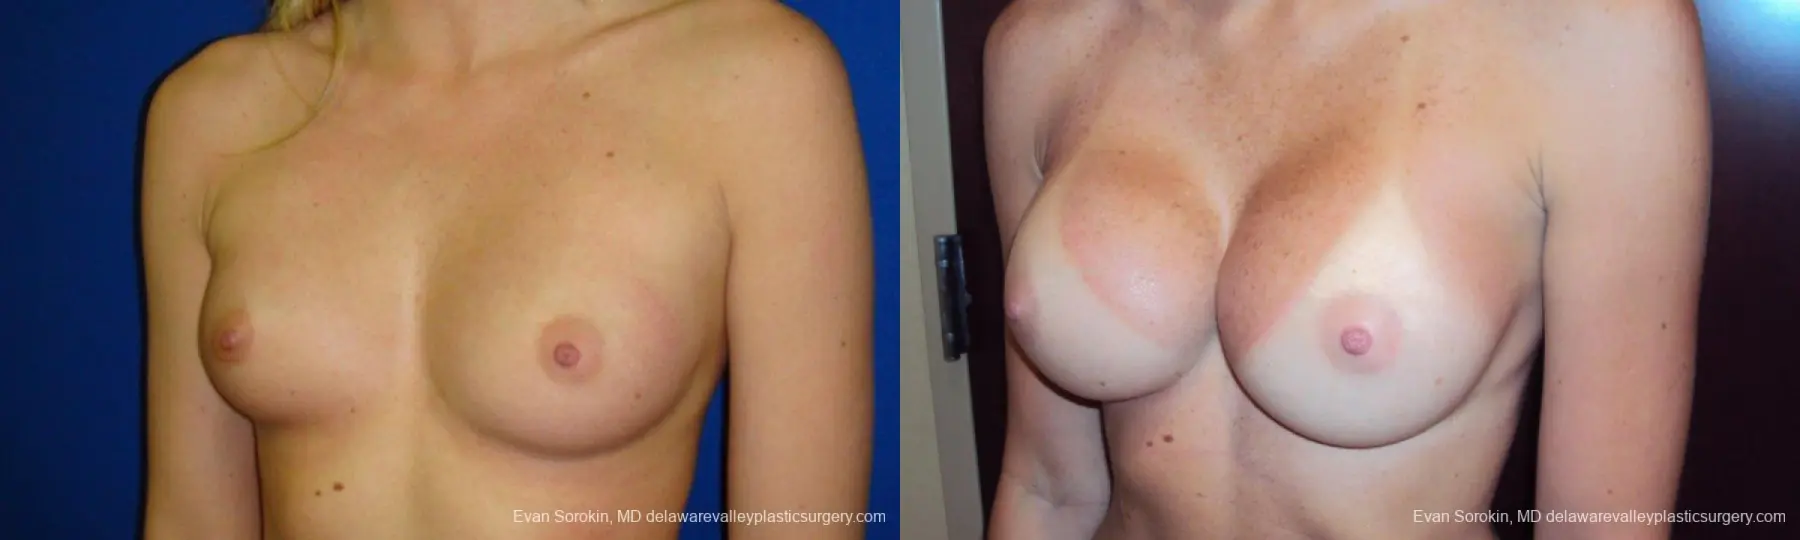 Philadelphia Breast Augmentation 9293 - Before and After 4